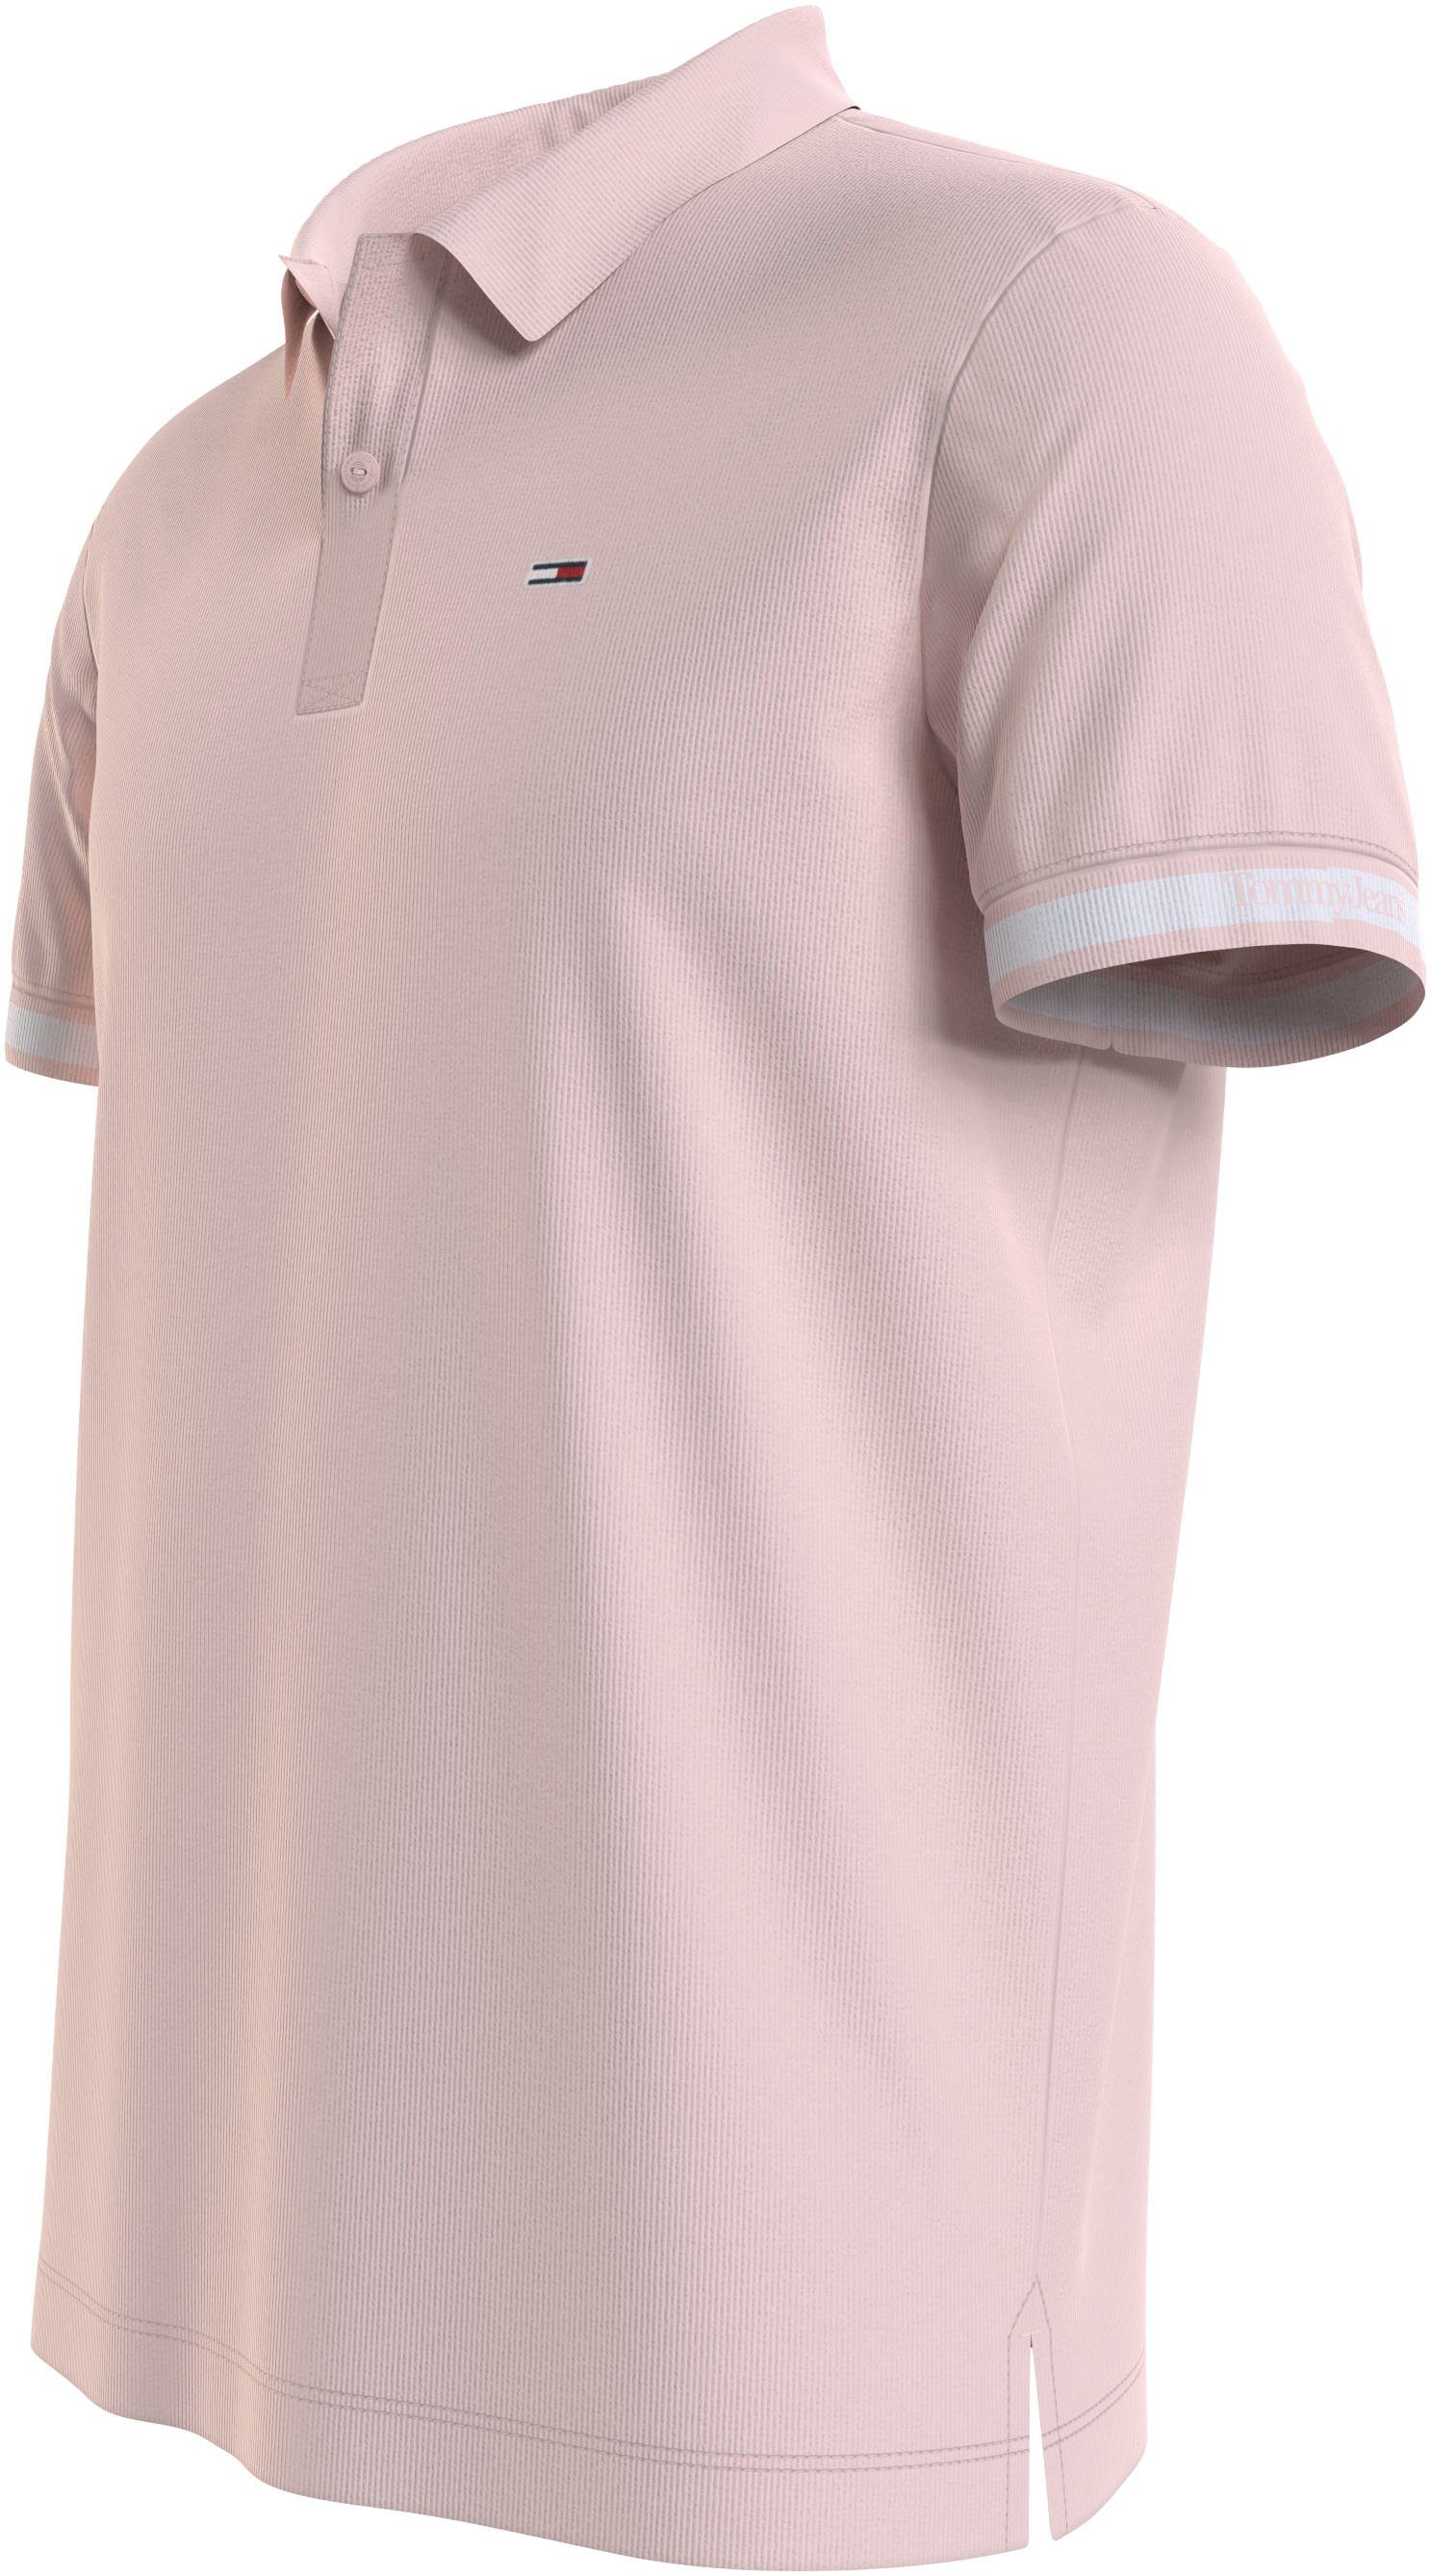 Tommy Jeans Poloshirt TJM CLSC ESSENTIAL mit FaintPink Logostickerei POLO